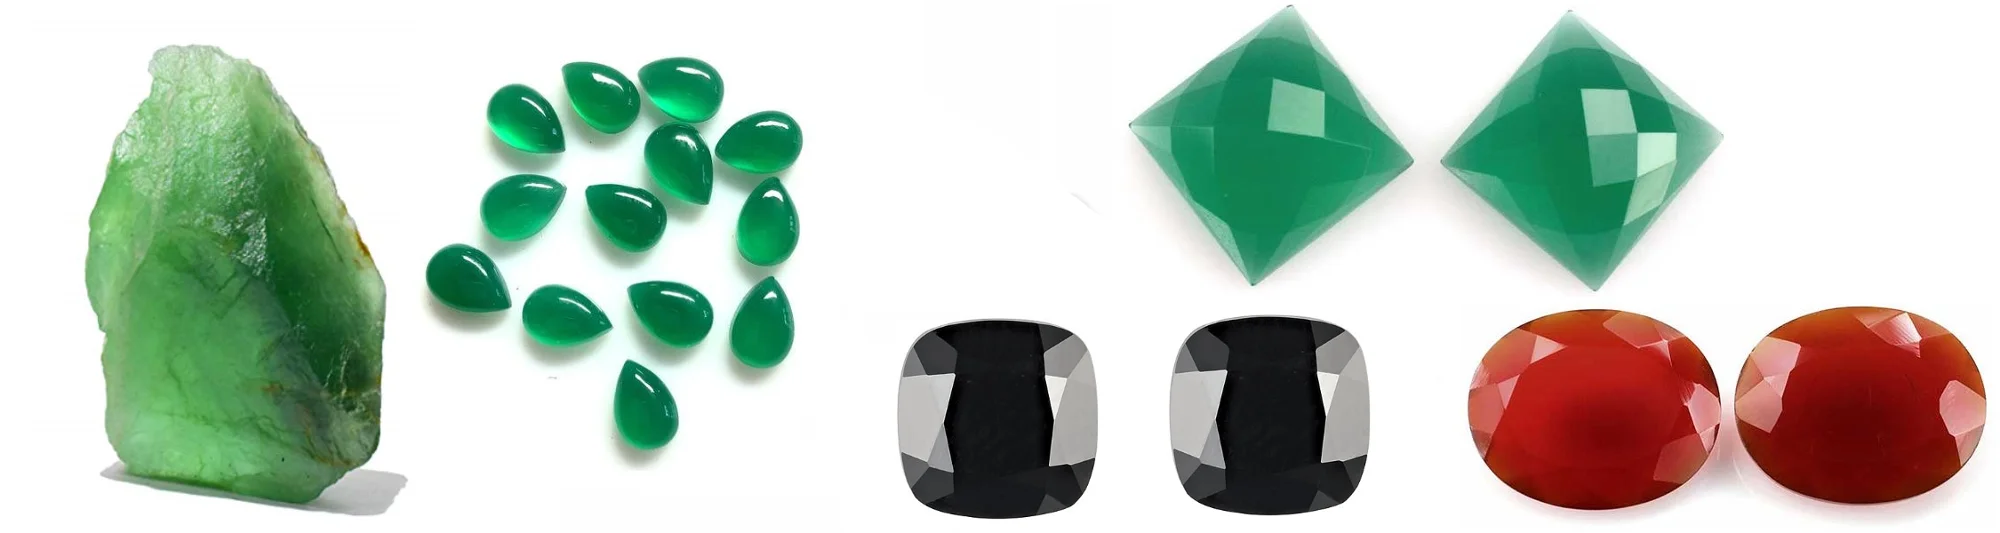 Details about   Natural Green Onyx 7x9mm To 8x10mm Octagon Faceted Cut Loose Gemstones